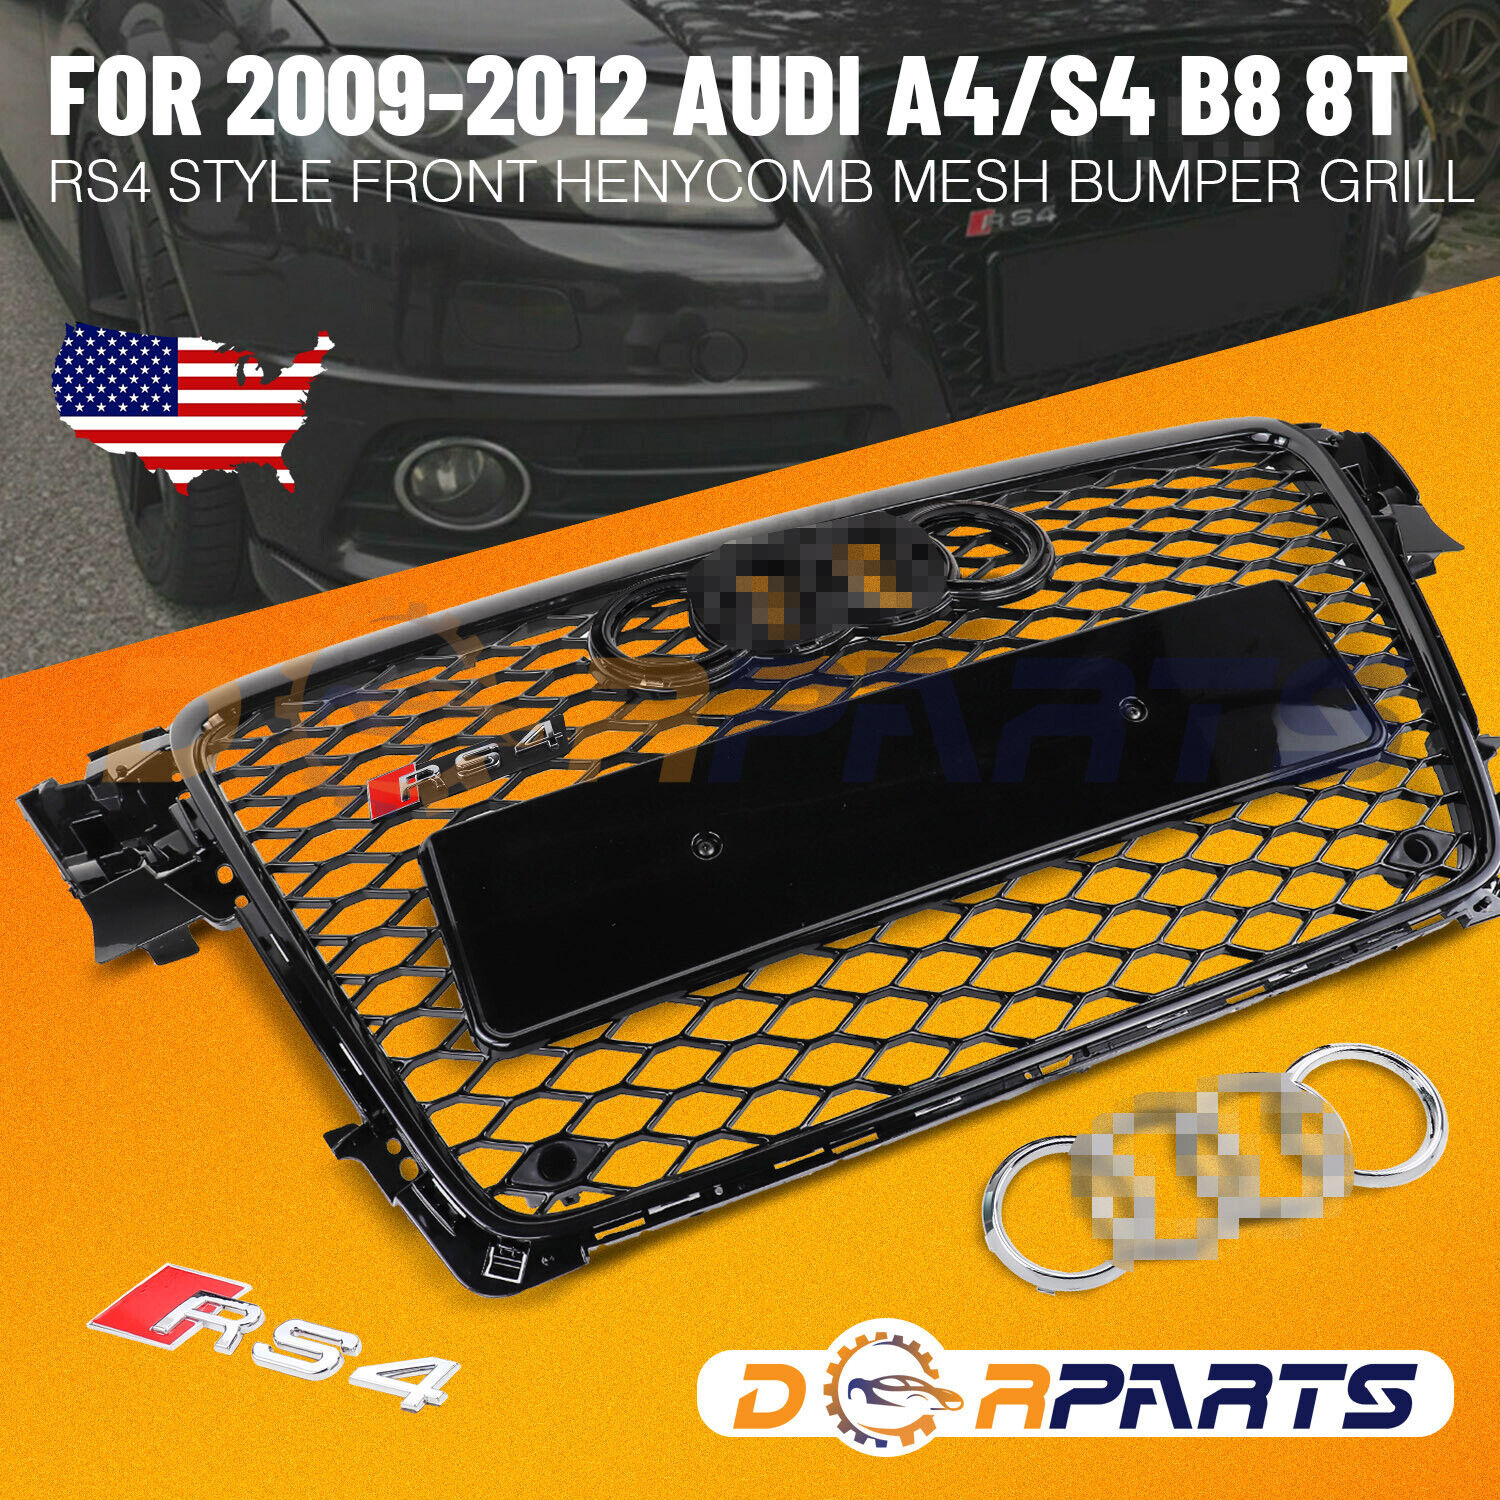 Honeycomb Sport Mesh RS4 Style Hex Grille Grill fits for 09-12 Audi A4/S4 B8 8T